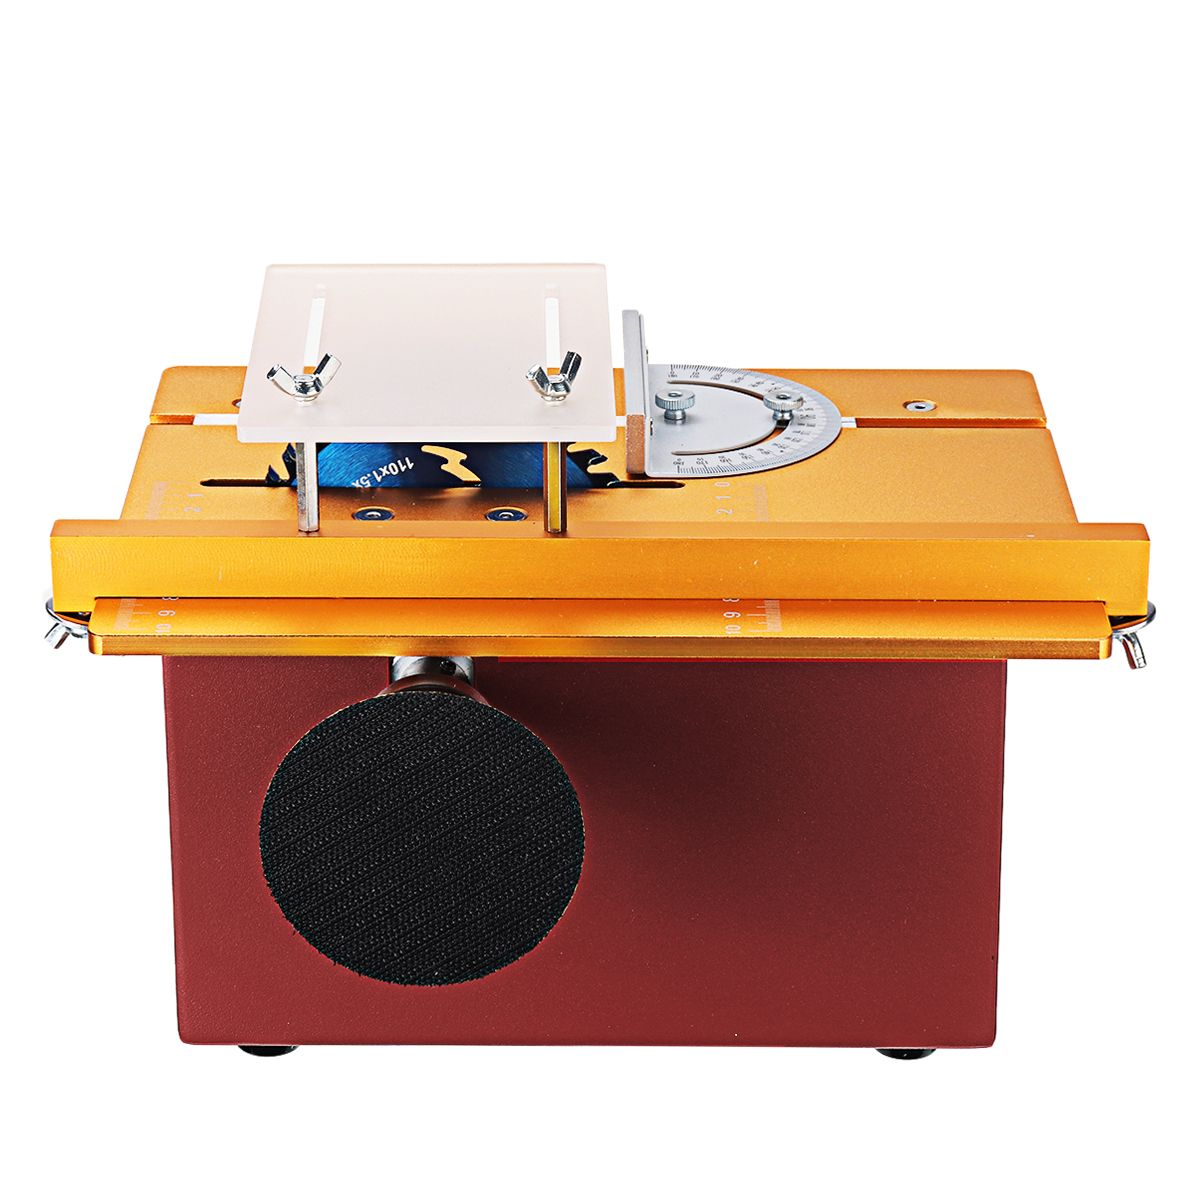 T60-DC-12-24vDC-Mini-Table-Saw-DIY-Woodworking-Saw-Table-Cutter-Small-Chainsaw-9000r--min-1669609